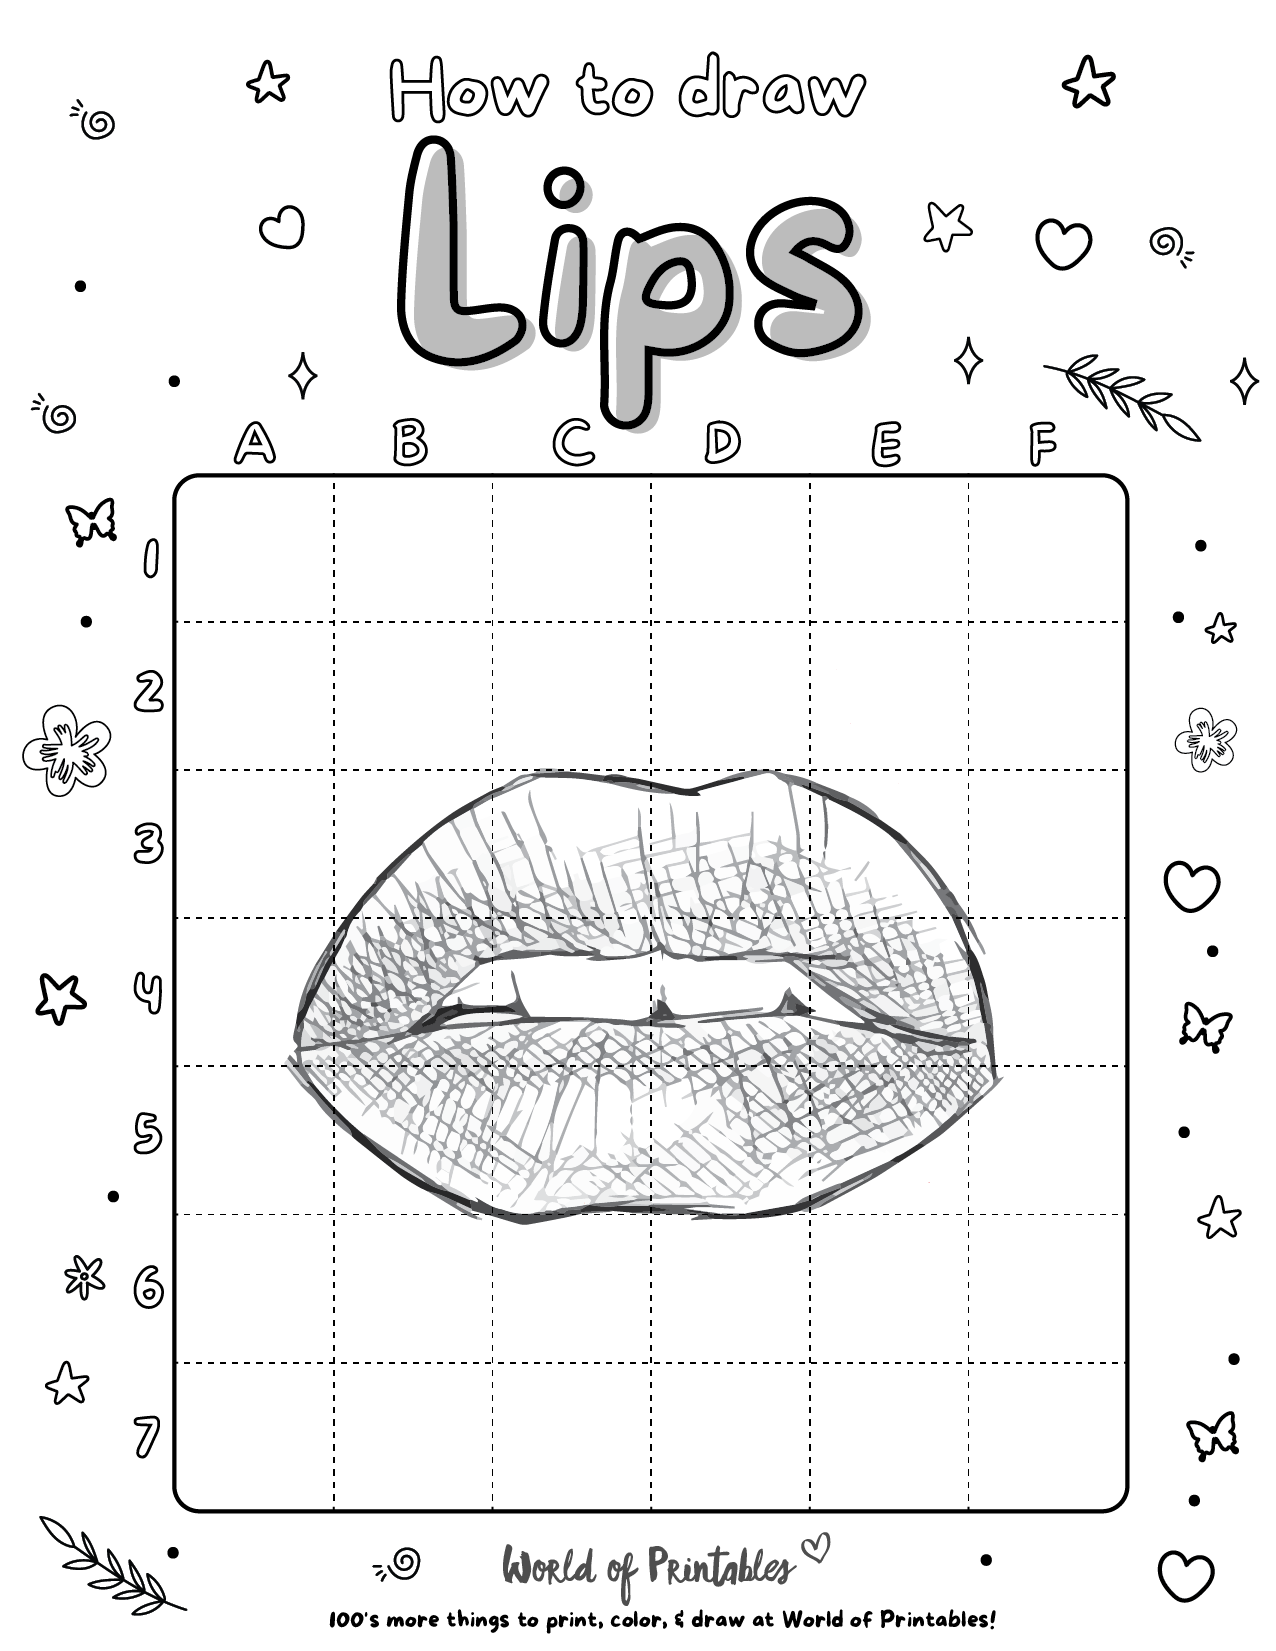 How to draw lips easy step by step drawing activities